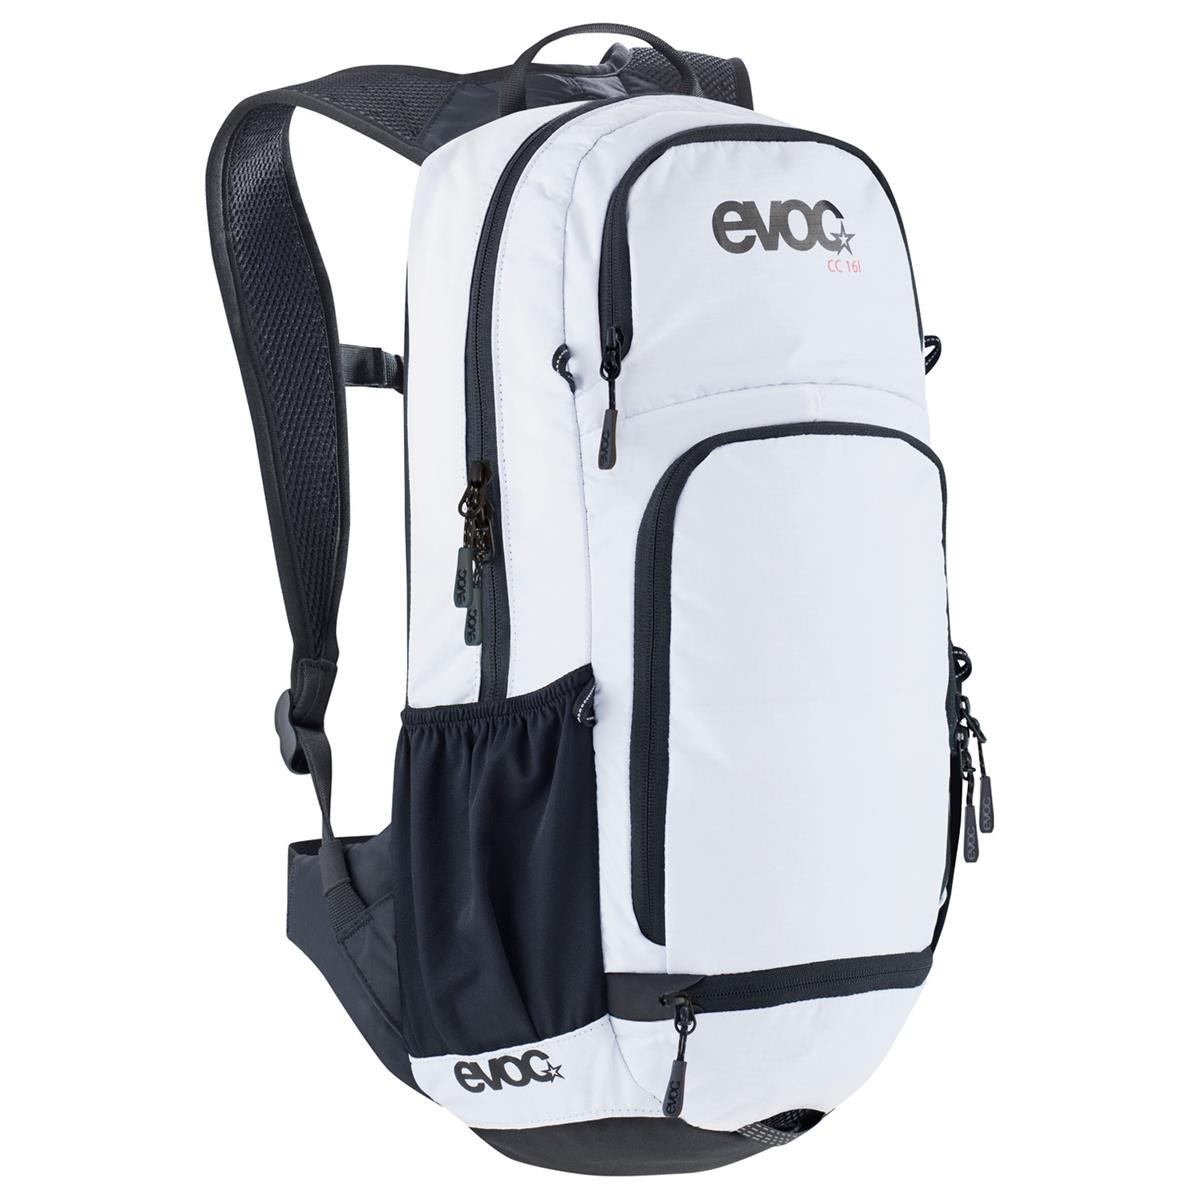 Evoc Backpack with Hydration System Compartment Cross Country White, 16 Liter